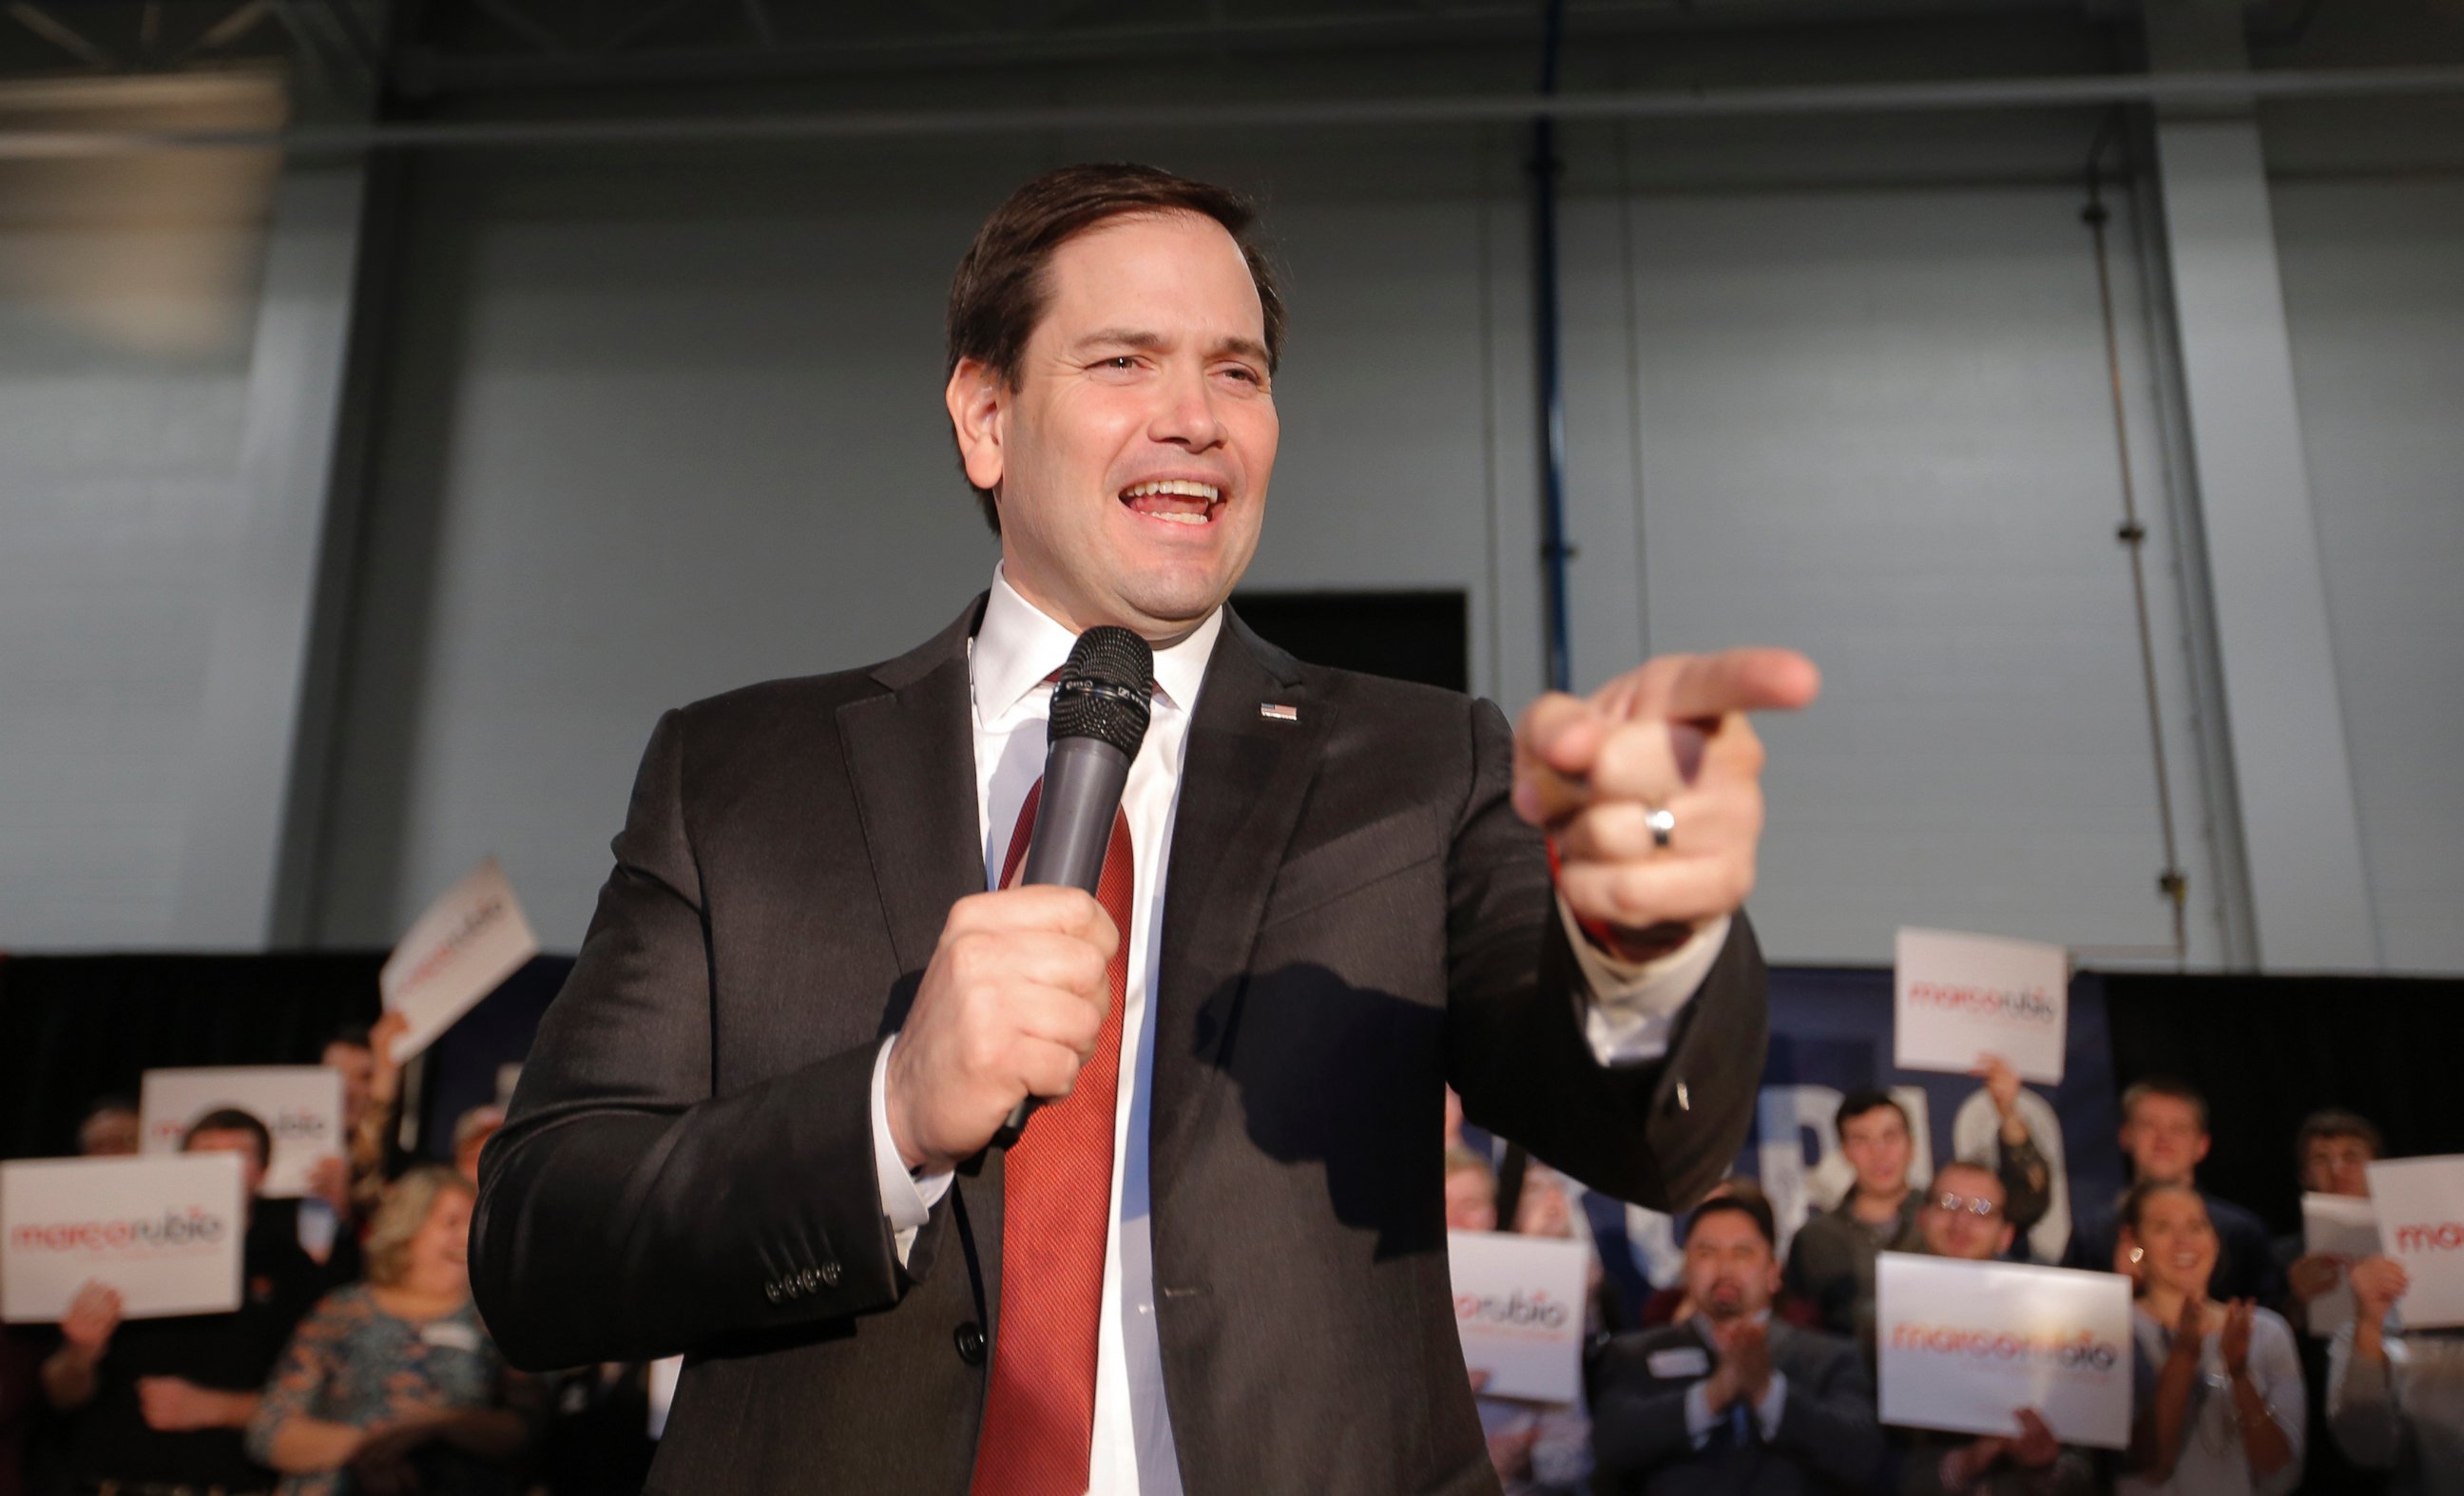 PHOTO:Marco Rubio gestures as he speaks at a campaign event during the night of the Nevada Republican caucus night at Lacks Enterprises in Grand Rapids, Mich., Feb. 23, 2016.  